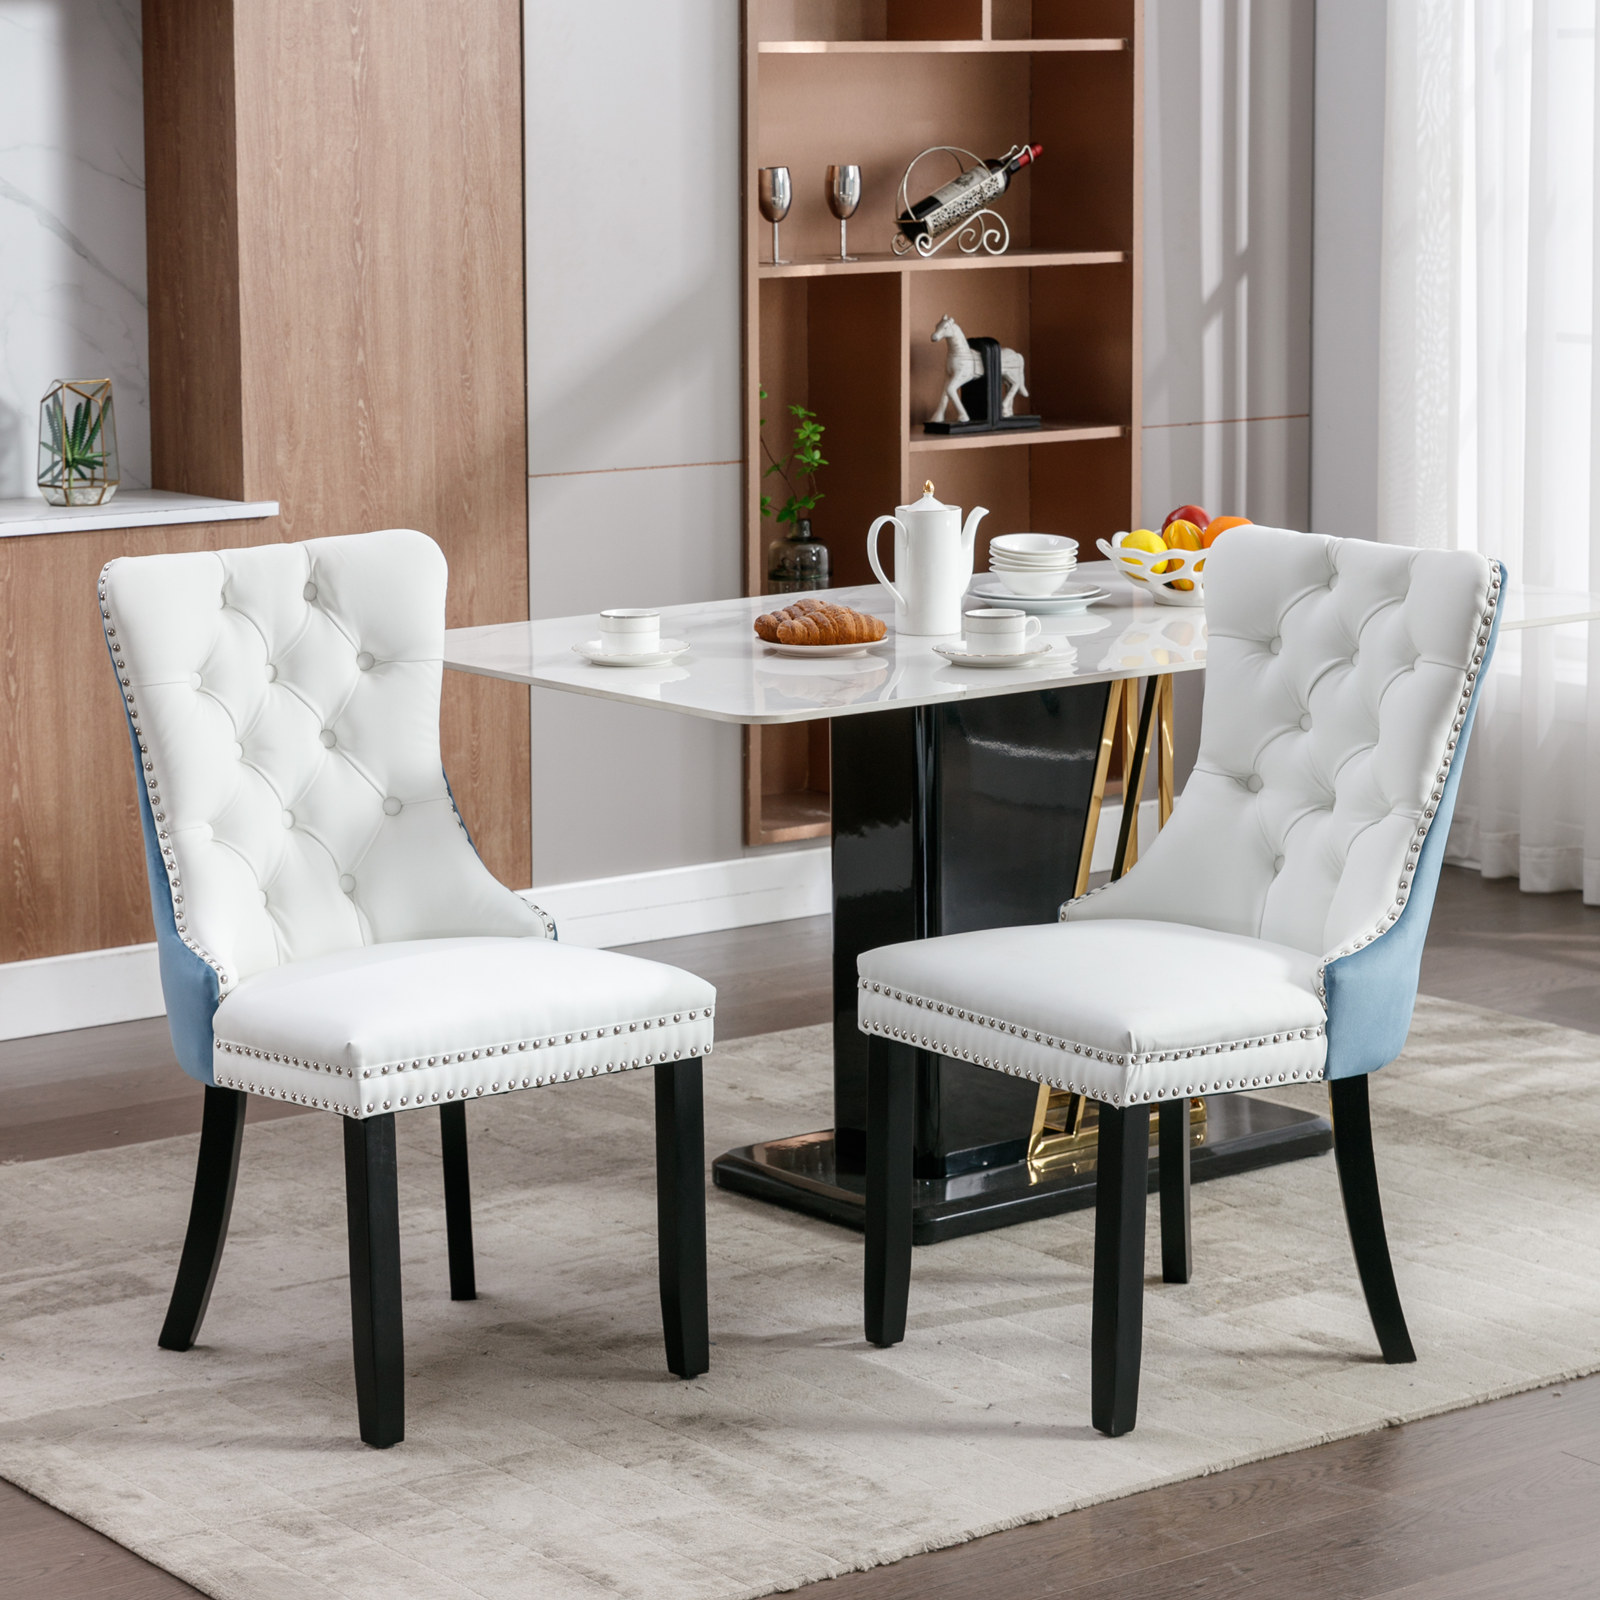 Montary Tufted Wood PU and Velvet Upholstered Dining Chair Set of 2